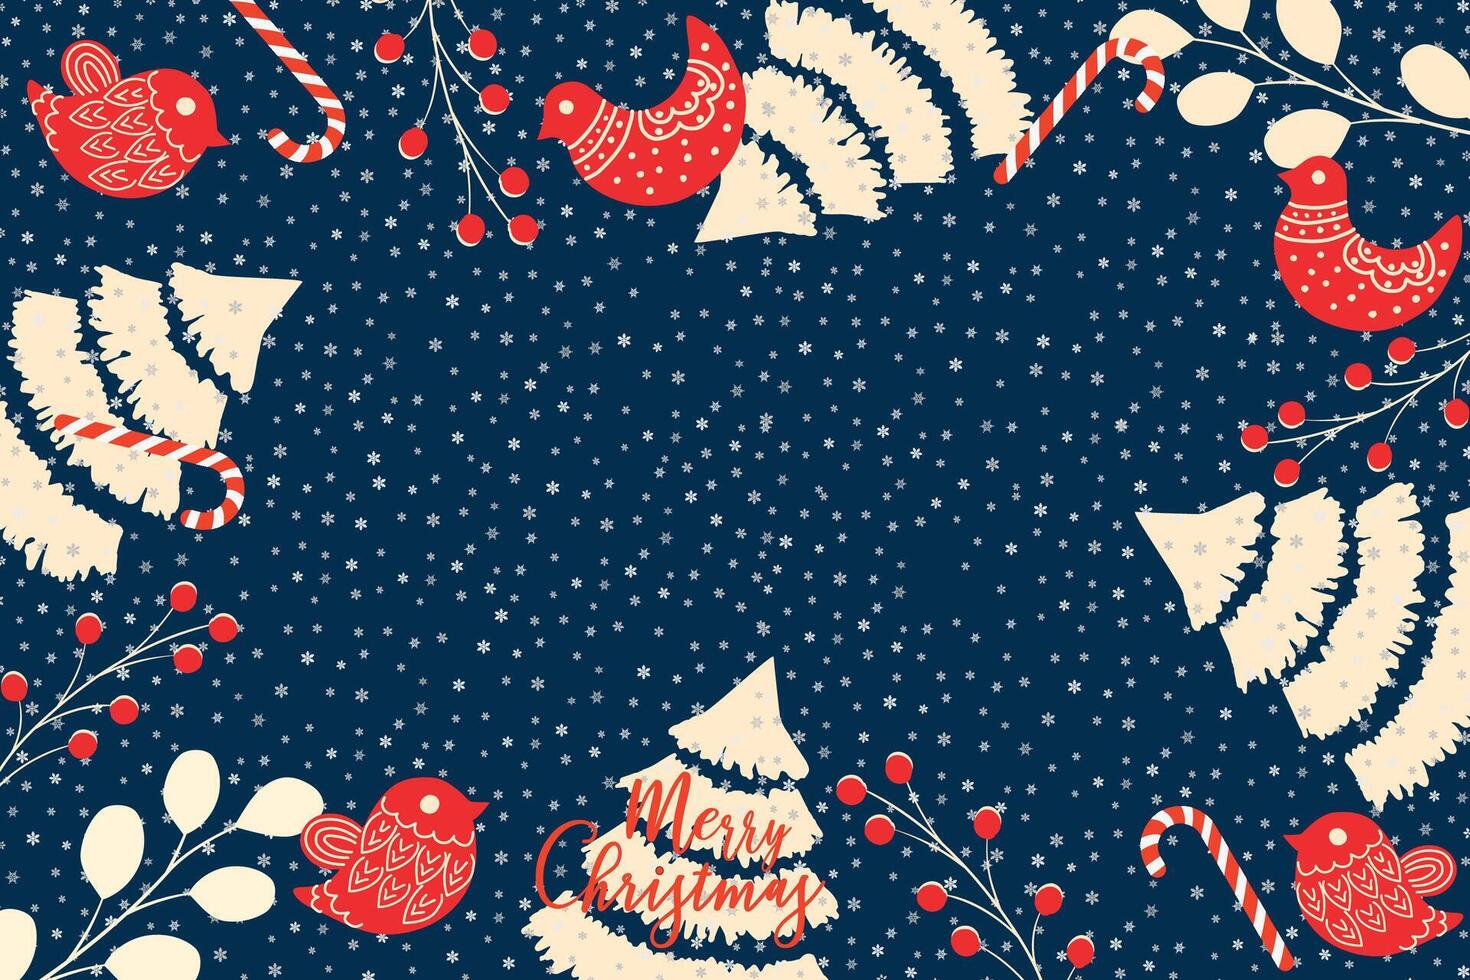 Hand drawn merry christmas happy holiday vector background with a christmas tree, ethnic birds and candy canes